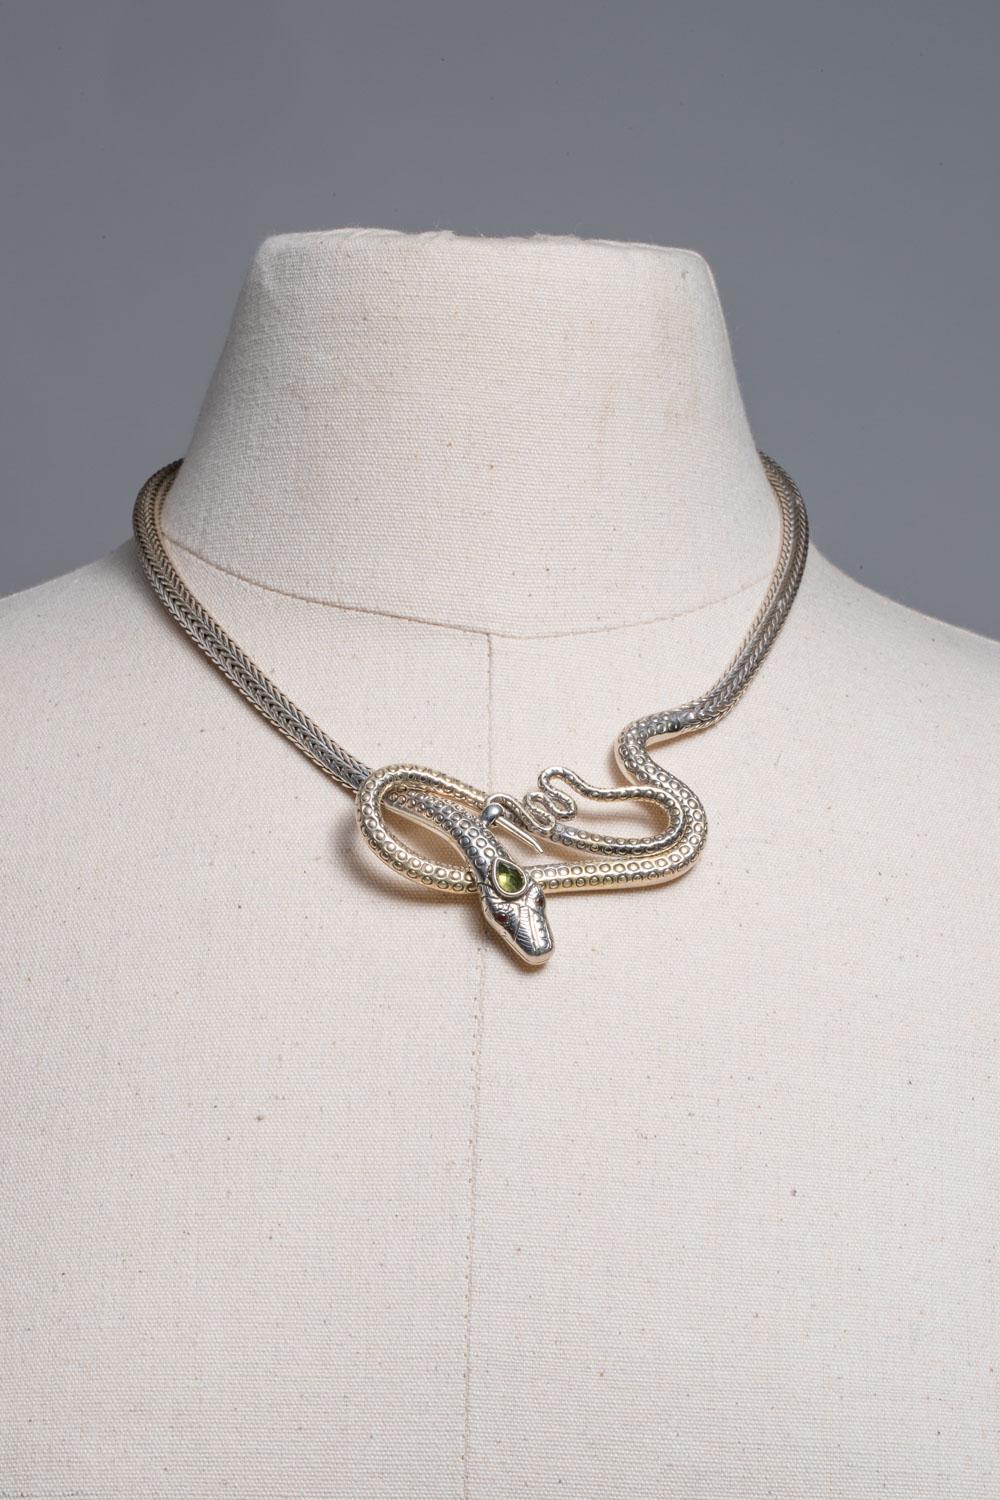 An exceptional hand-tooled and woven sterling silver coiled snake necklace with a faceted pear-shaped peridot third eye and faceted garnet eyes.  The clasp is in front and just below the head it hooks onto the tail.  Inside circumference is 16